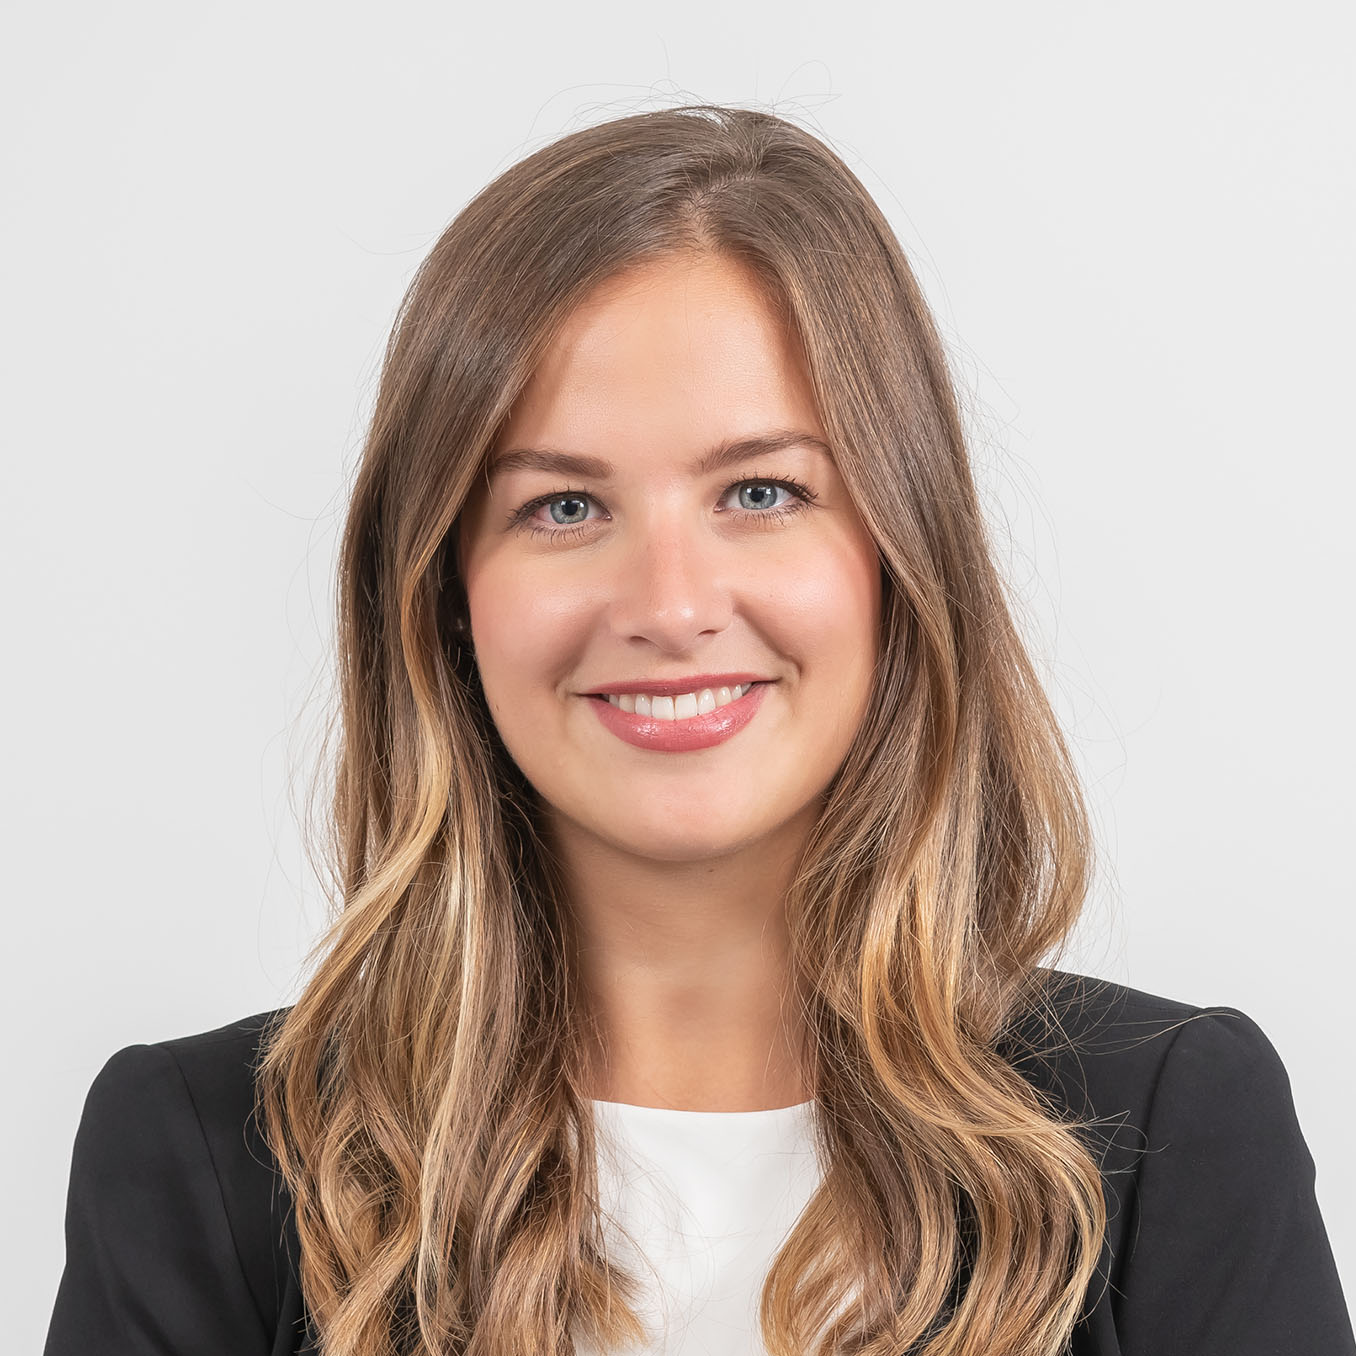 Corporate portrait of a young women photographed in a London office